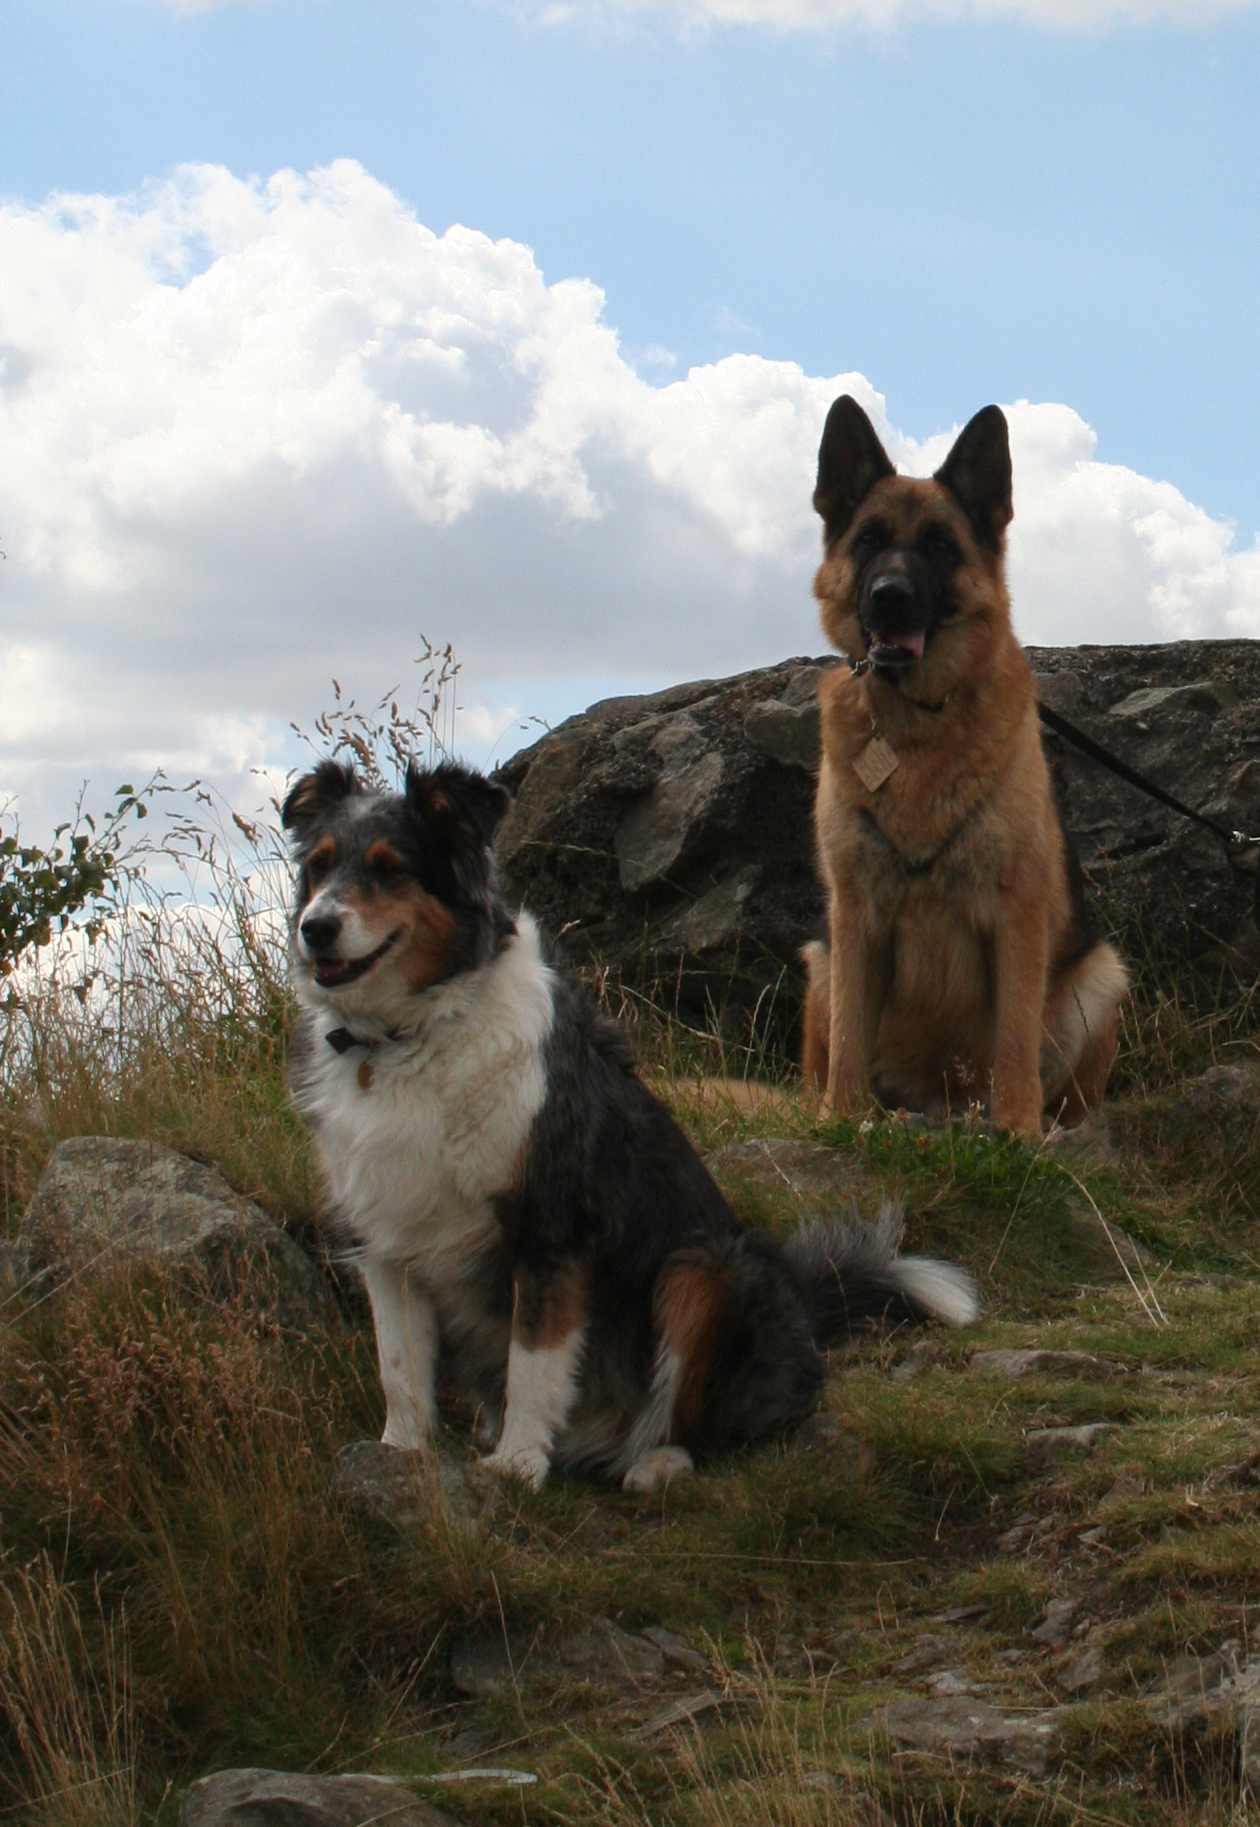 Misty & Caine on Bardon Hill, both died 2 wks apart February - March 2012, both greatly missed